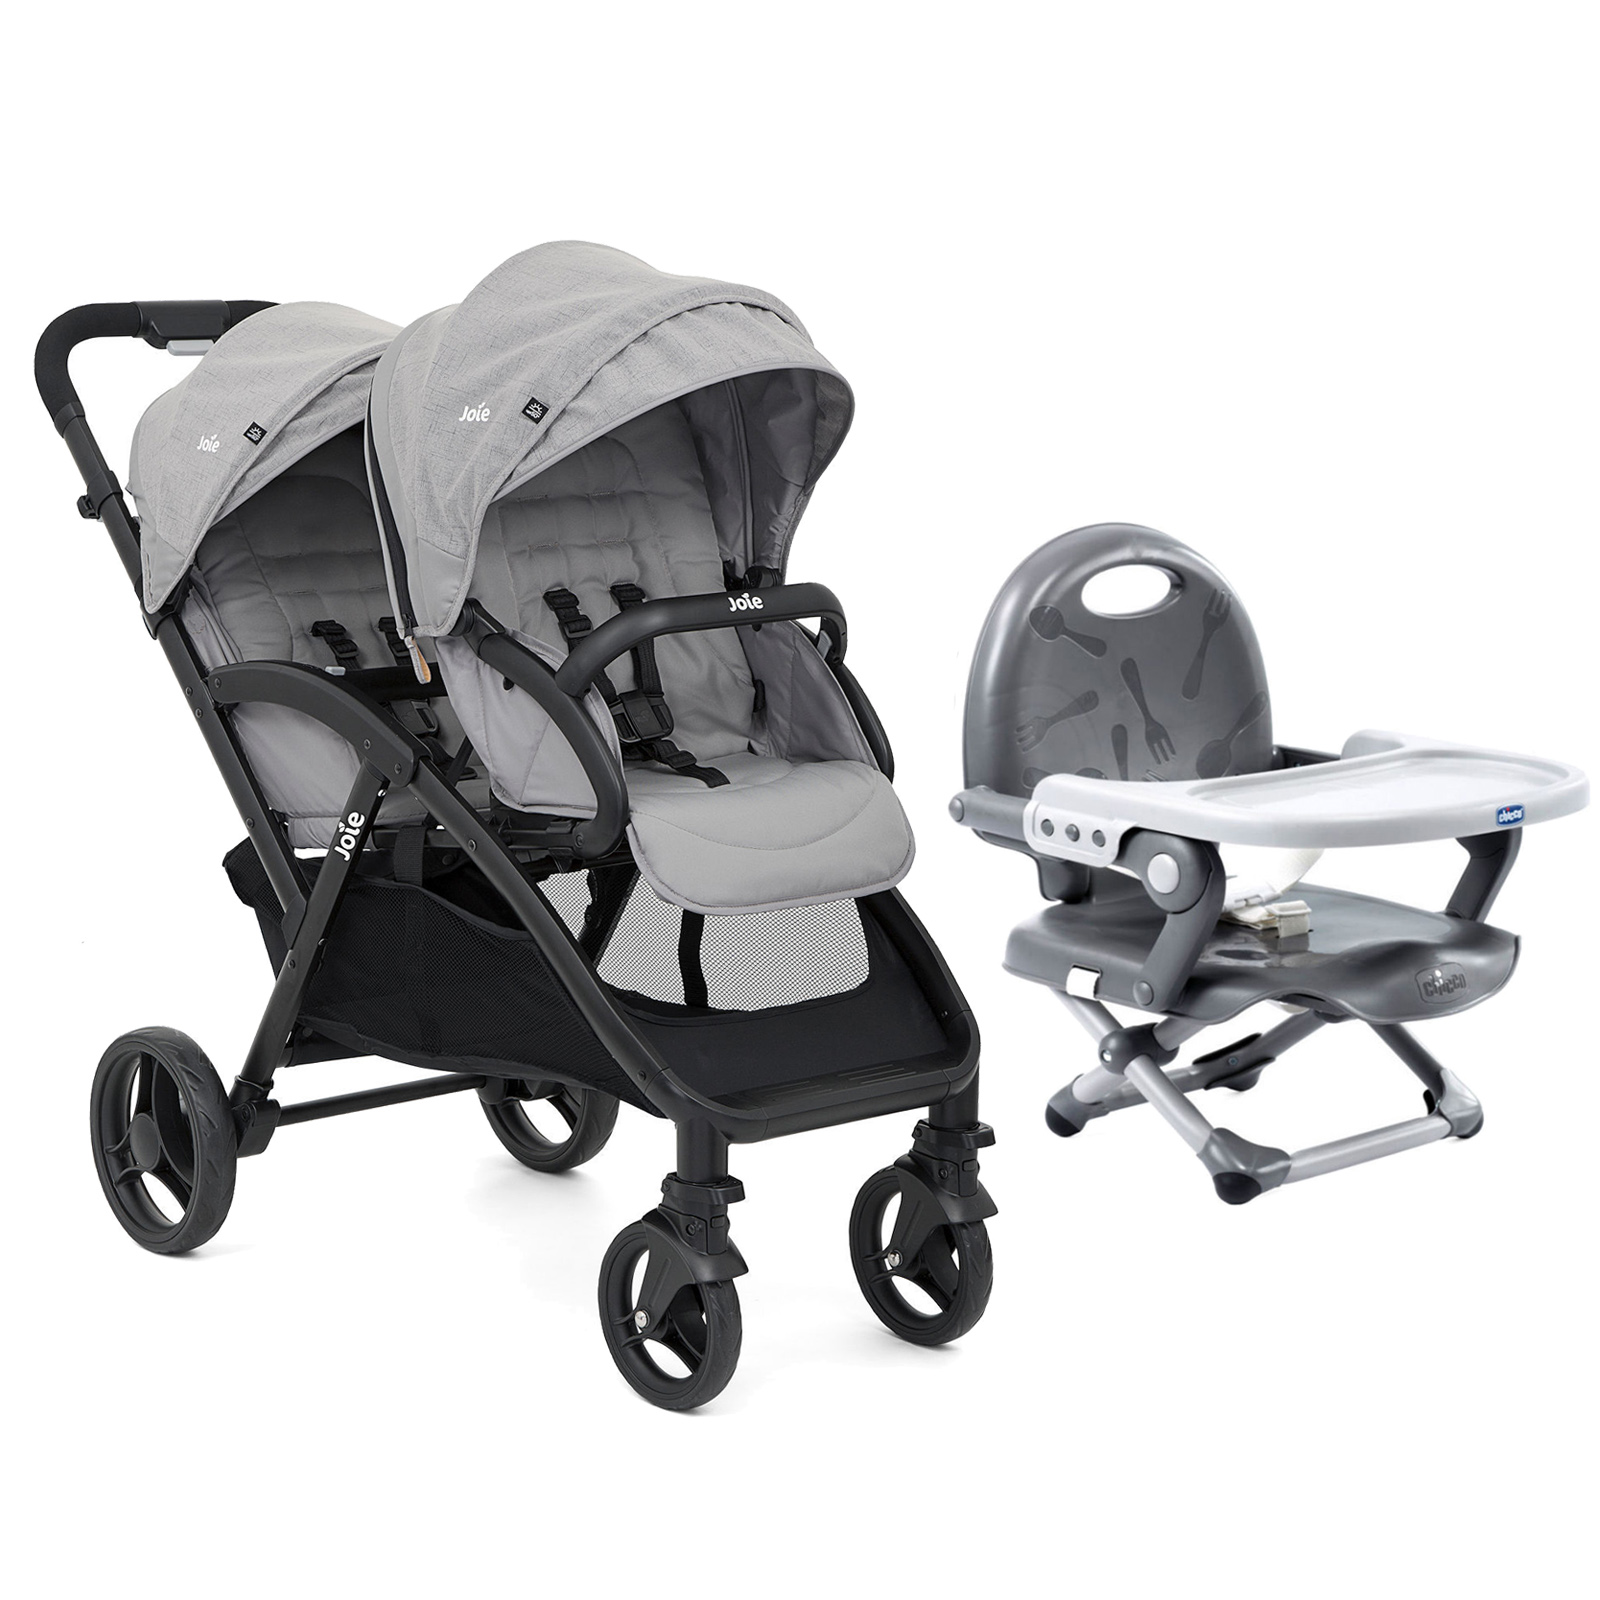 joie evalite duo buggy